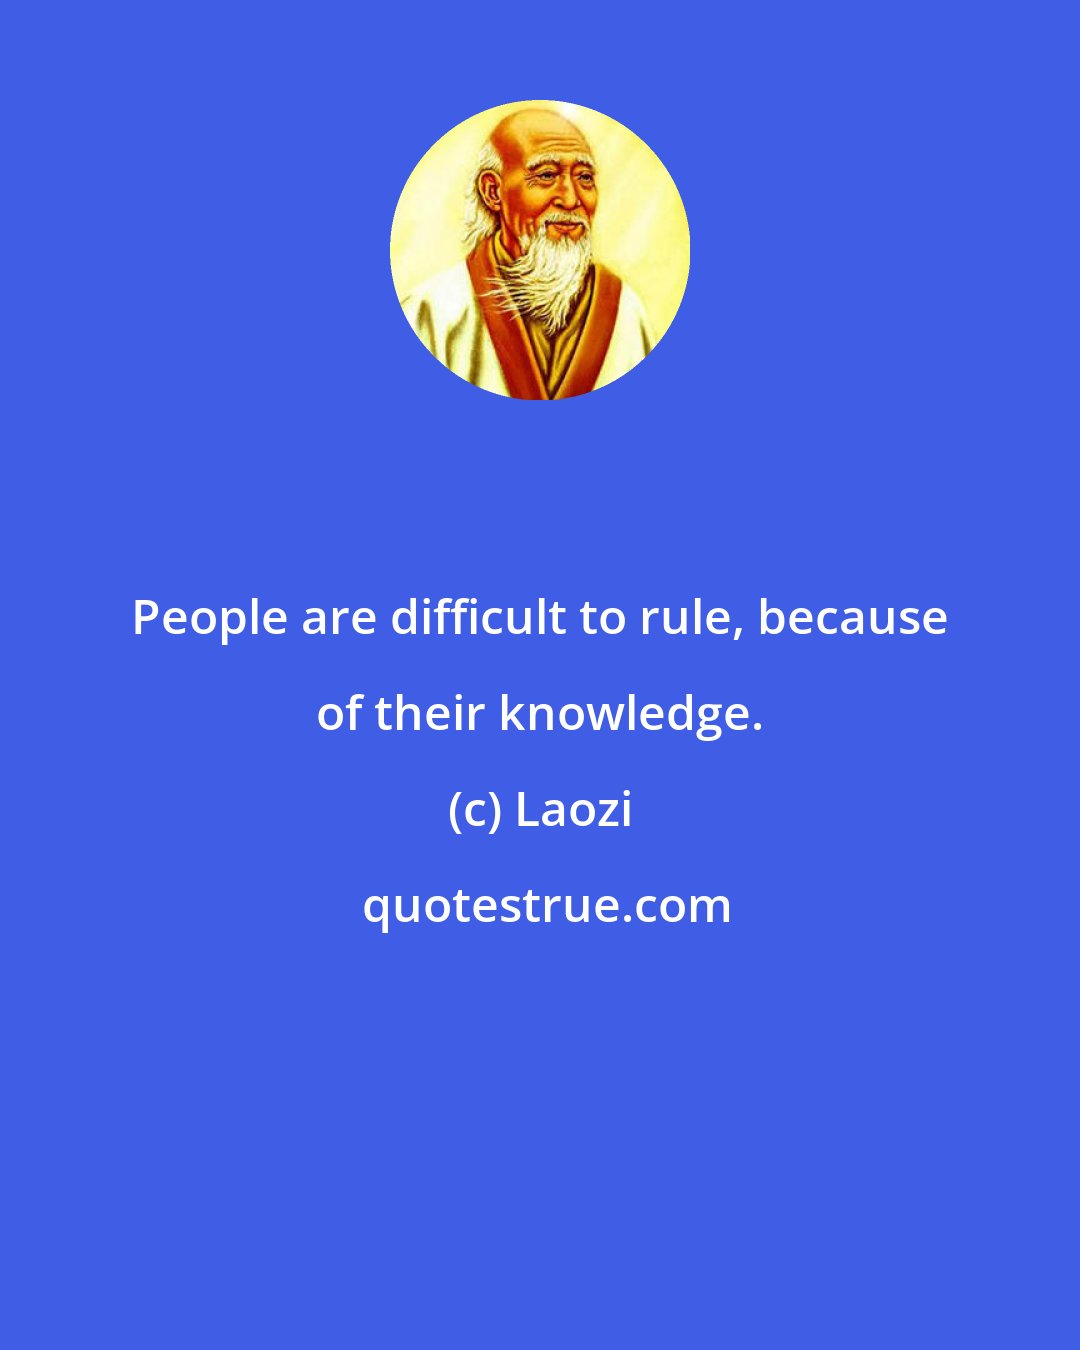 Laozi: People are difficult to rule, because of their knowledge.